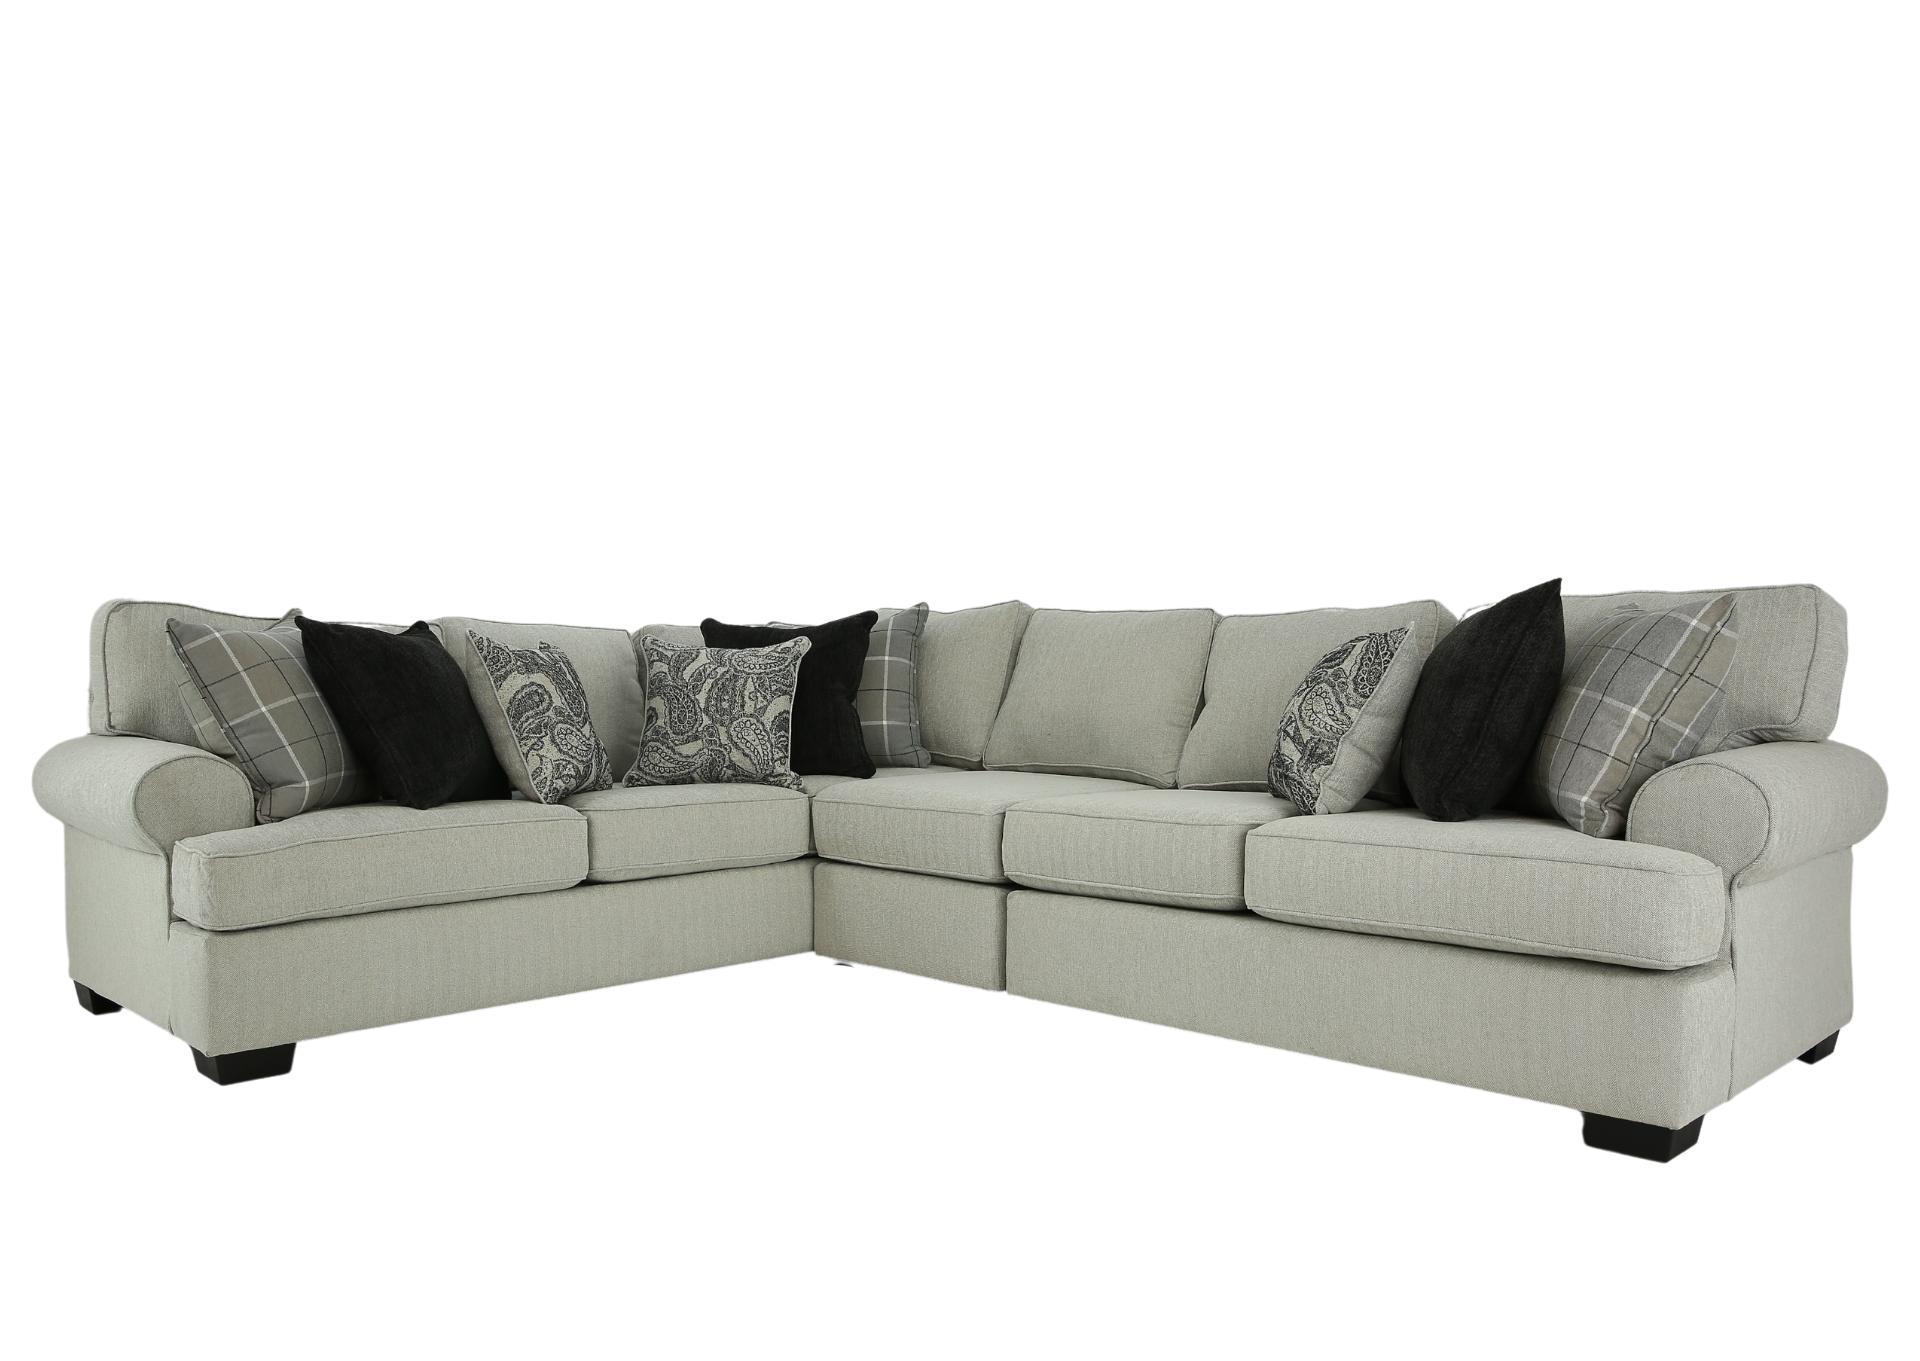 COOPER 3 PIECE SECTIONAL